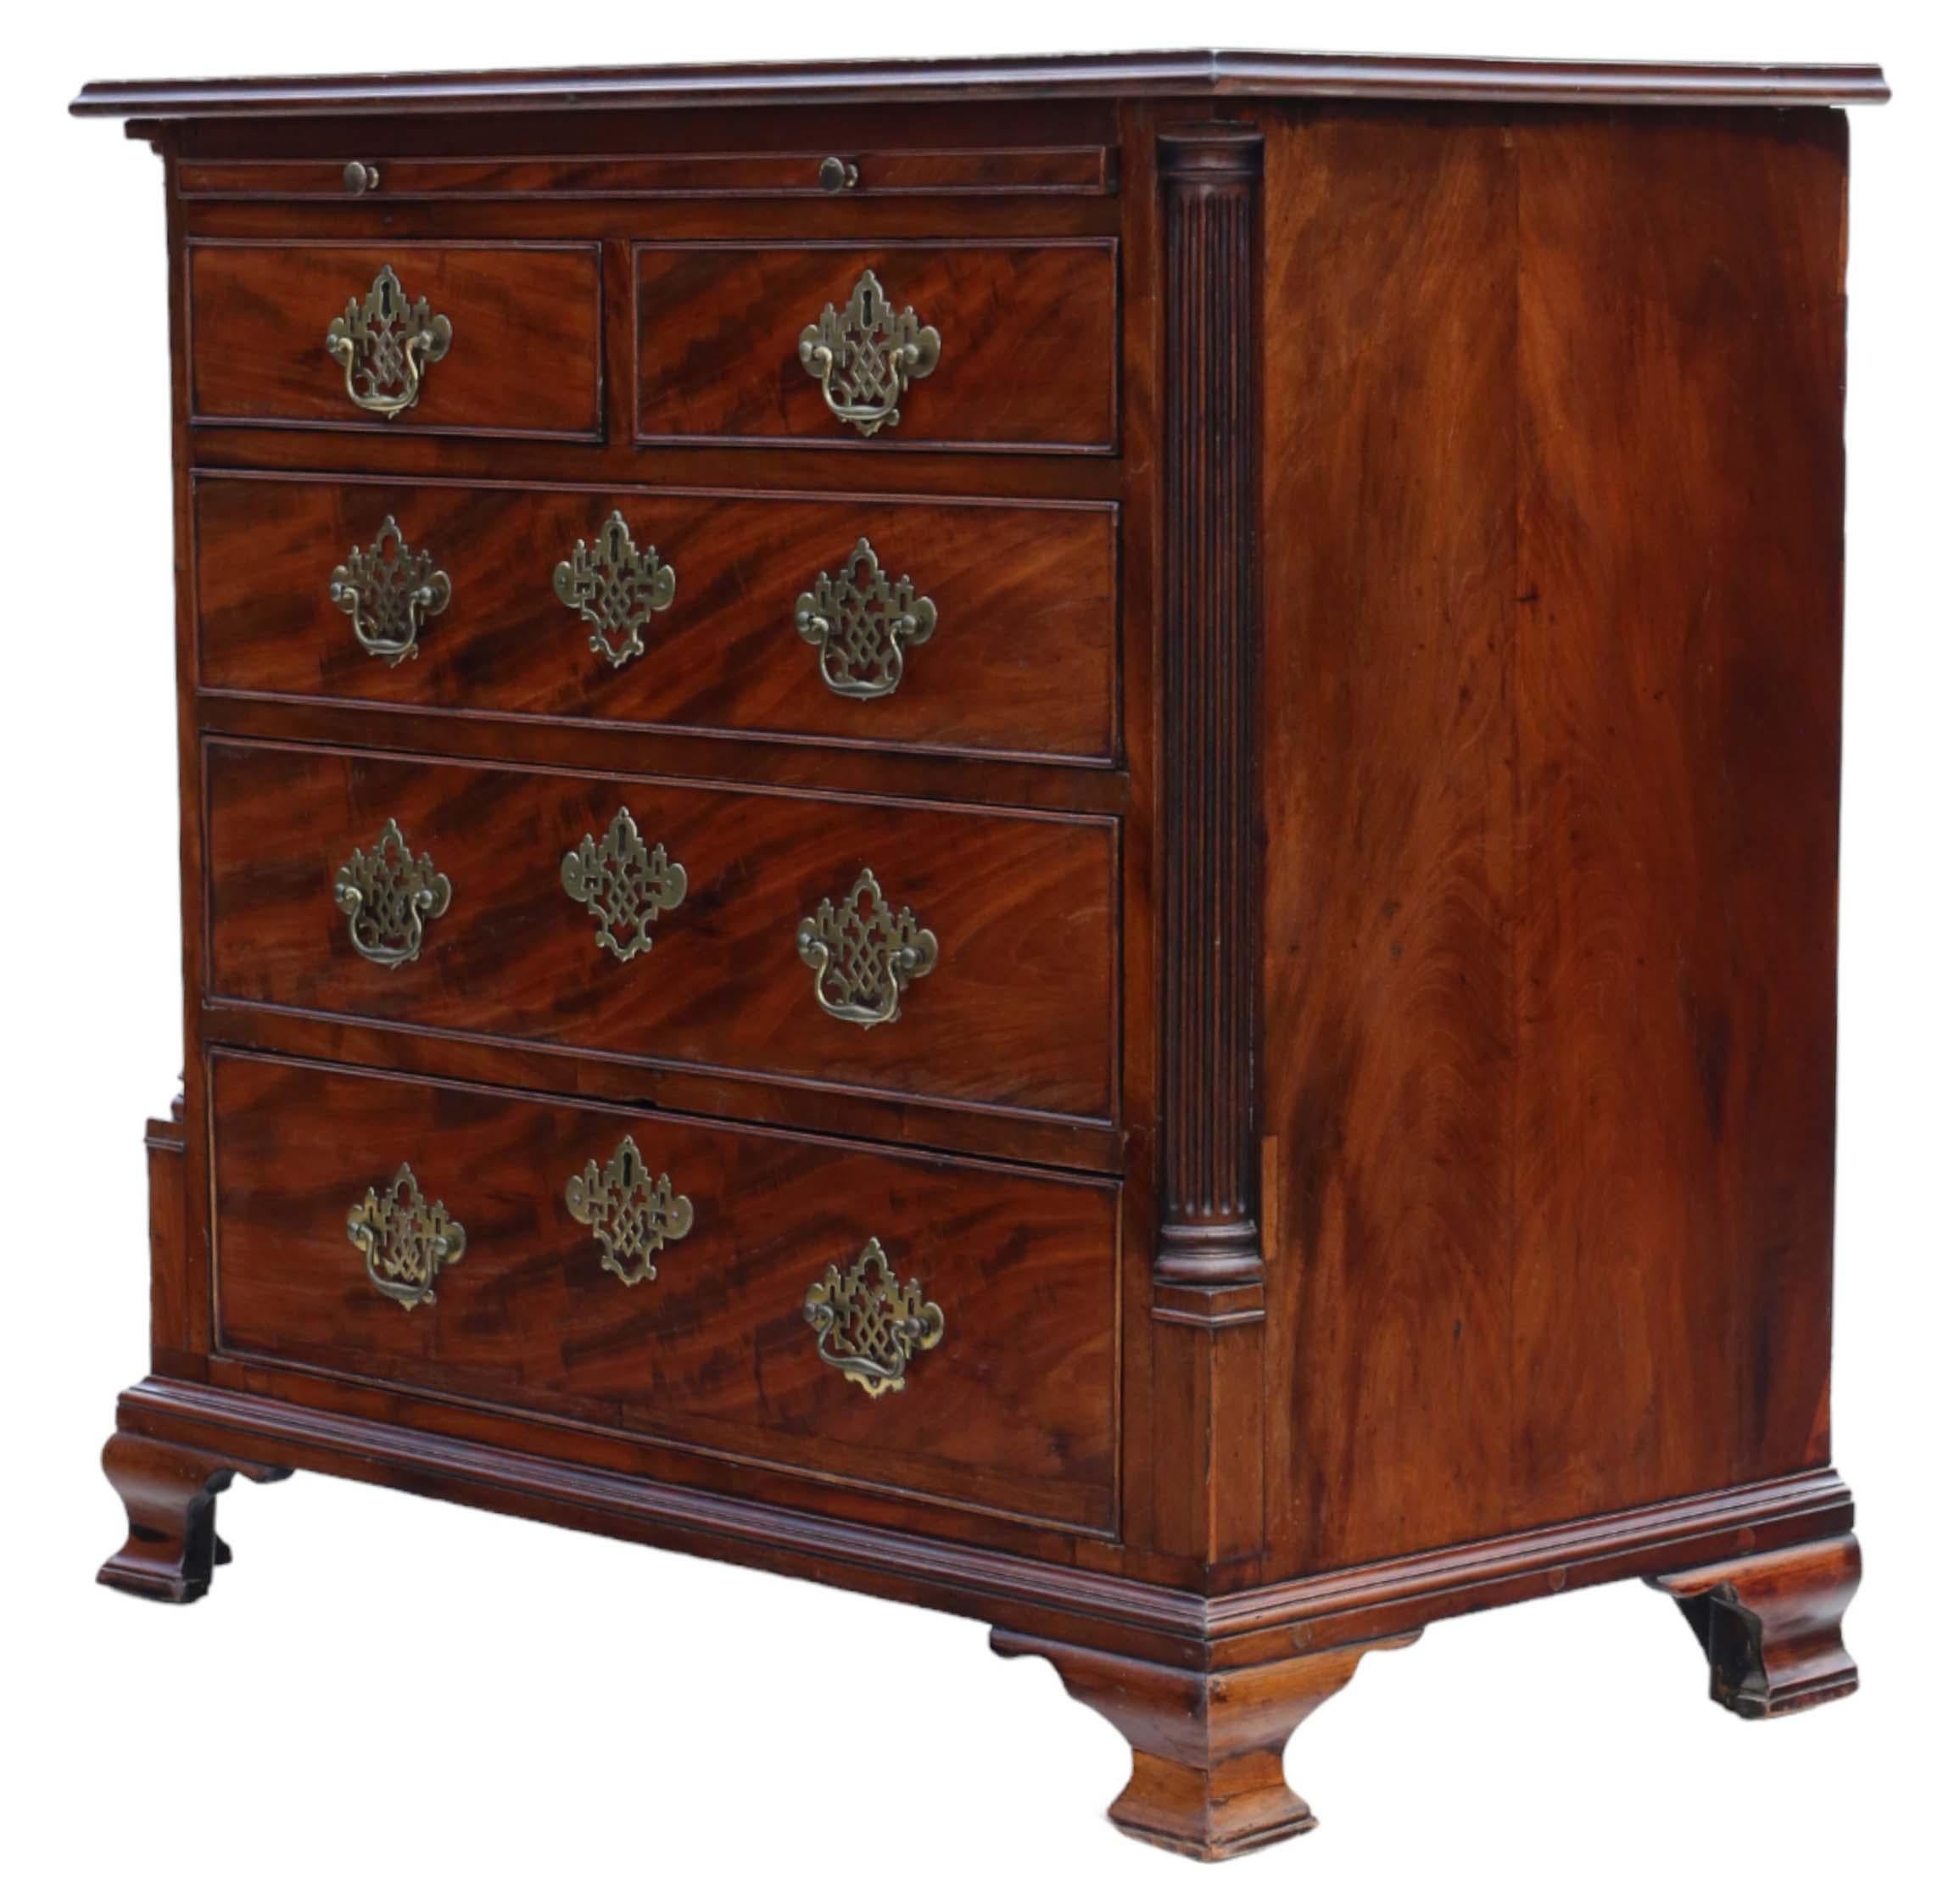 Antique fine quality Georgian 18th Century mahogany batchelors chest of drawers.
This is a lovely quality chest of drawers.

No loose joints or woodworm and the oak lined drawers and brushing slide move freely.

Overall maximum dimensions: 79cmW x